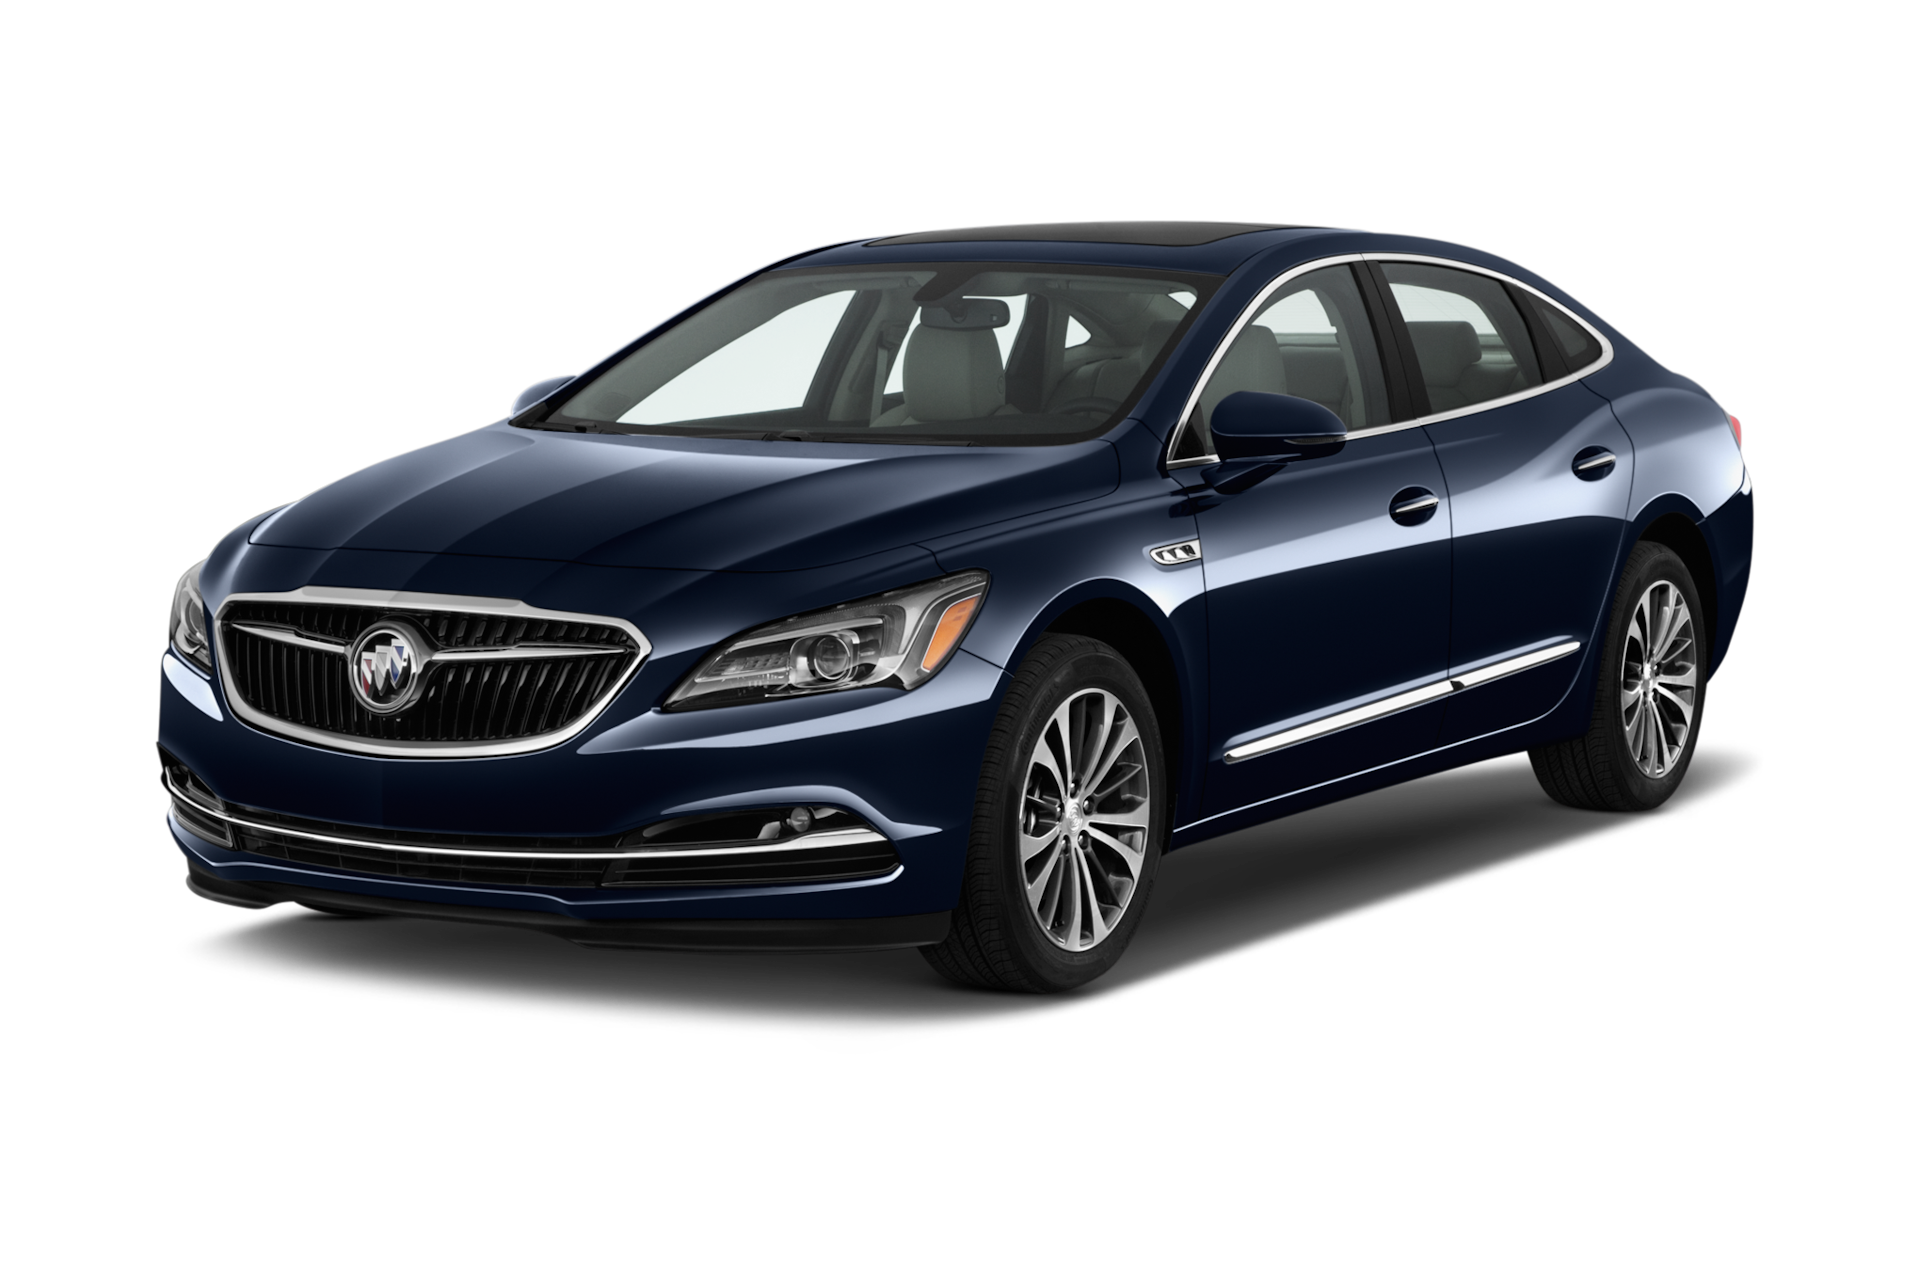 2019 Buick LaCrosse Prices, Reviews, and Photos - MotorTrend